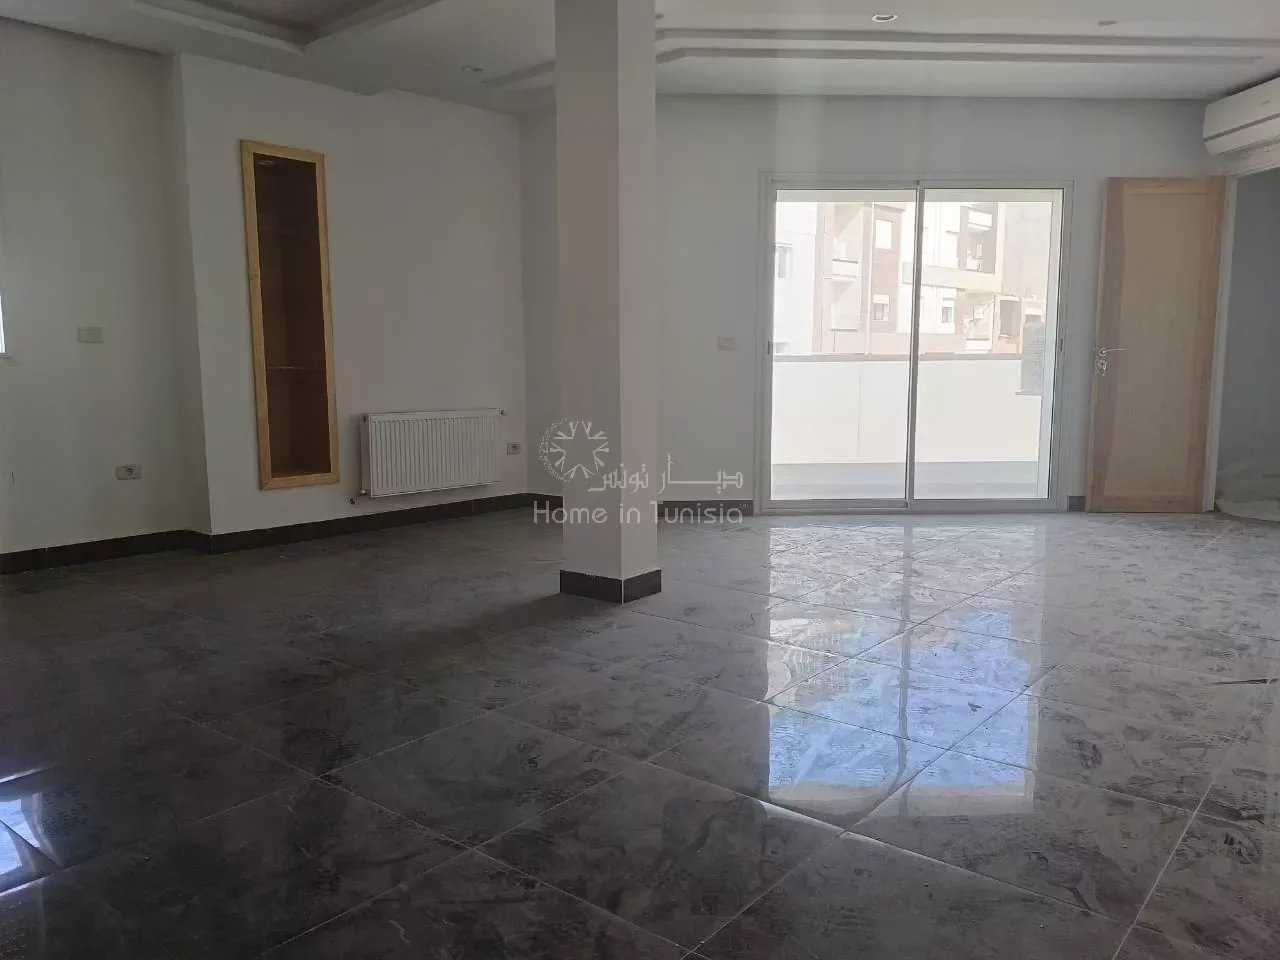 Residential in Sahloul, Sousse Jaouhara 12273254